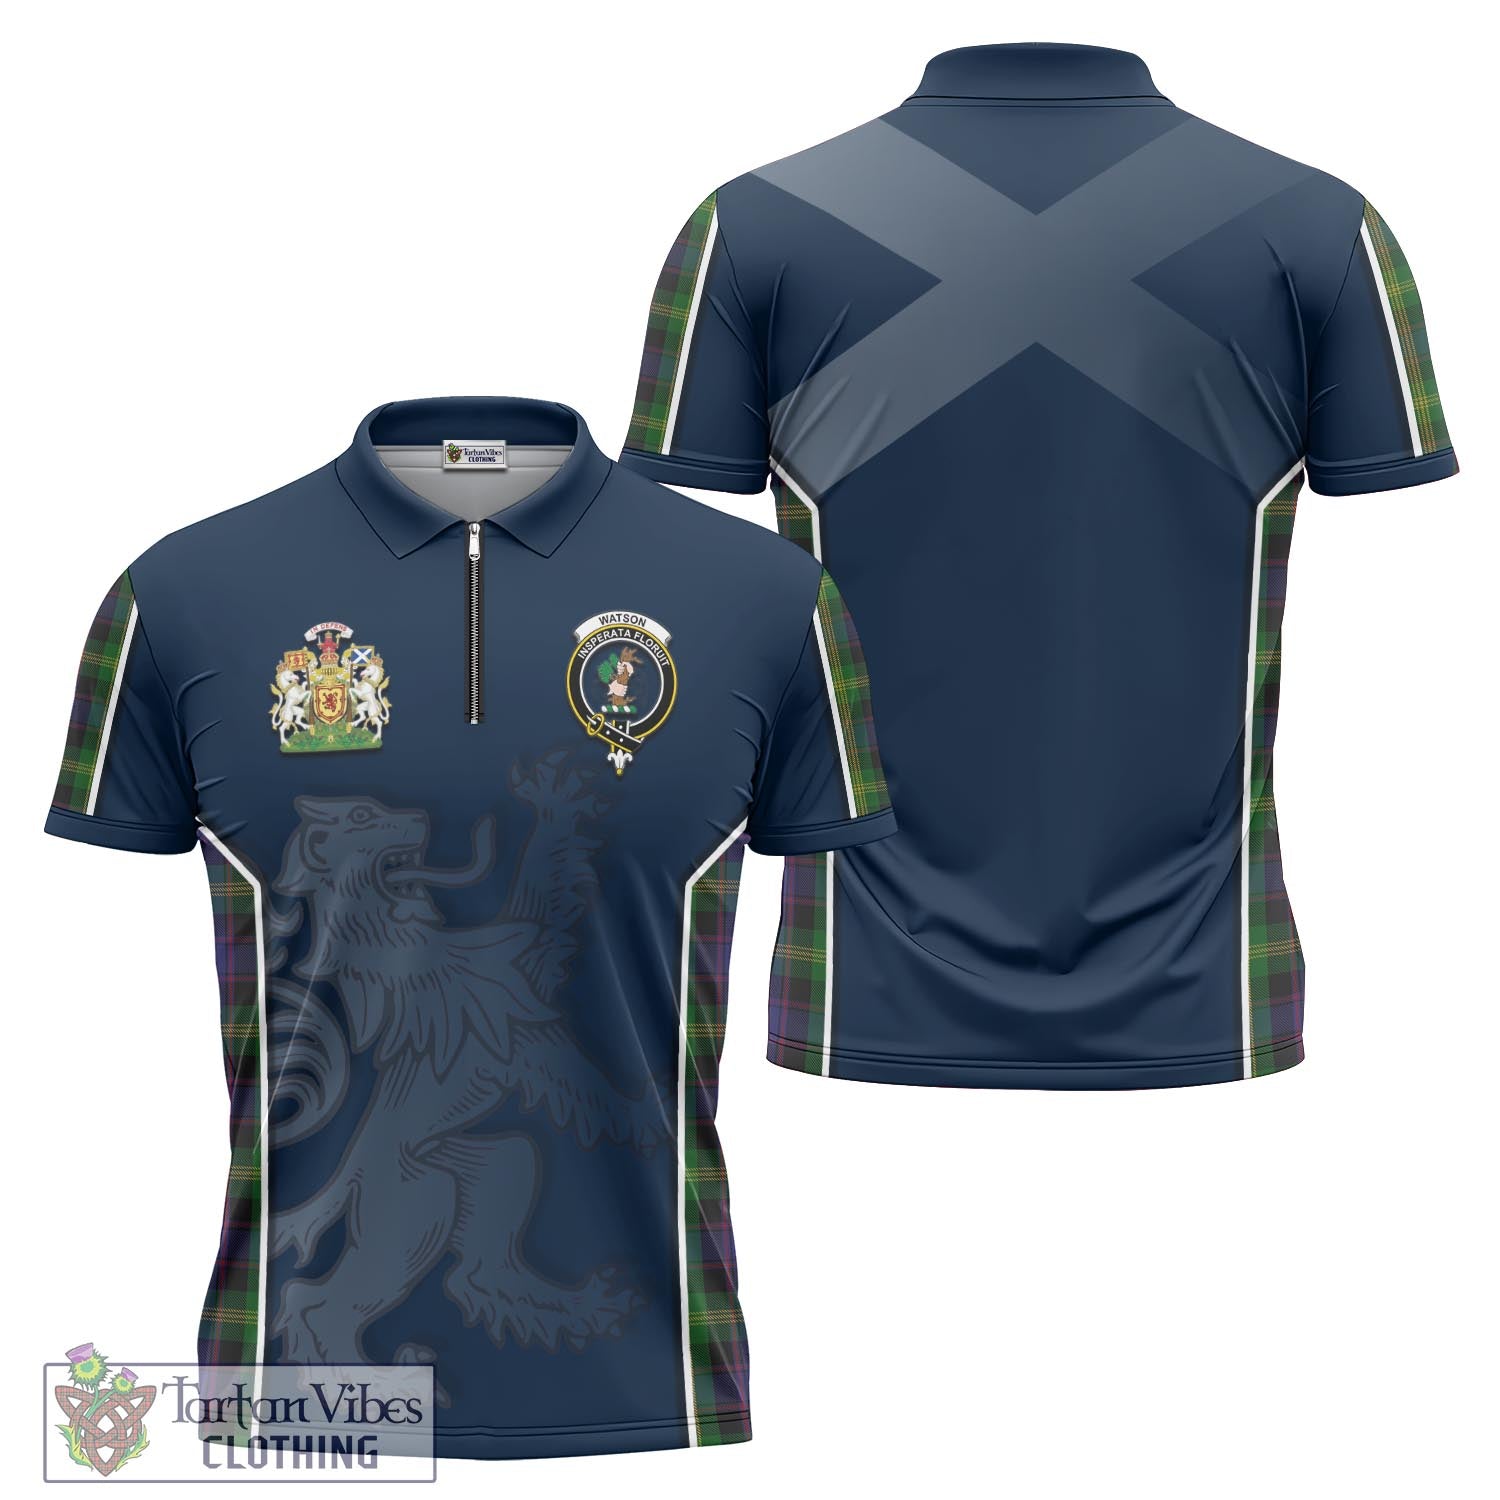 Tartan Vibes Clothing Watson Tartan Zipper Polo Shirt with Family Crest and Lion Rampant Vibes Sport Style